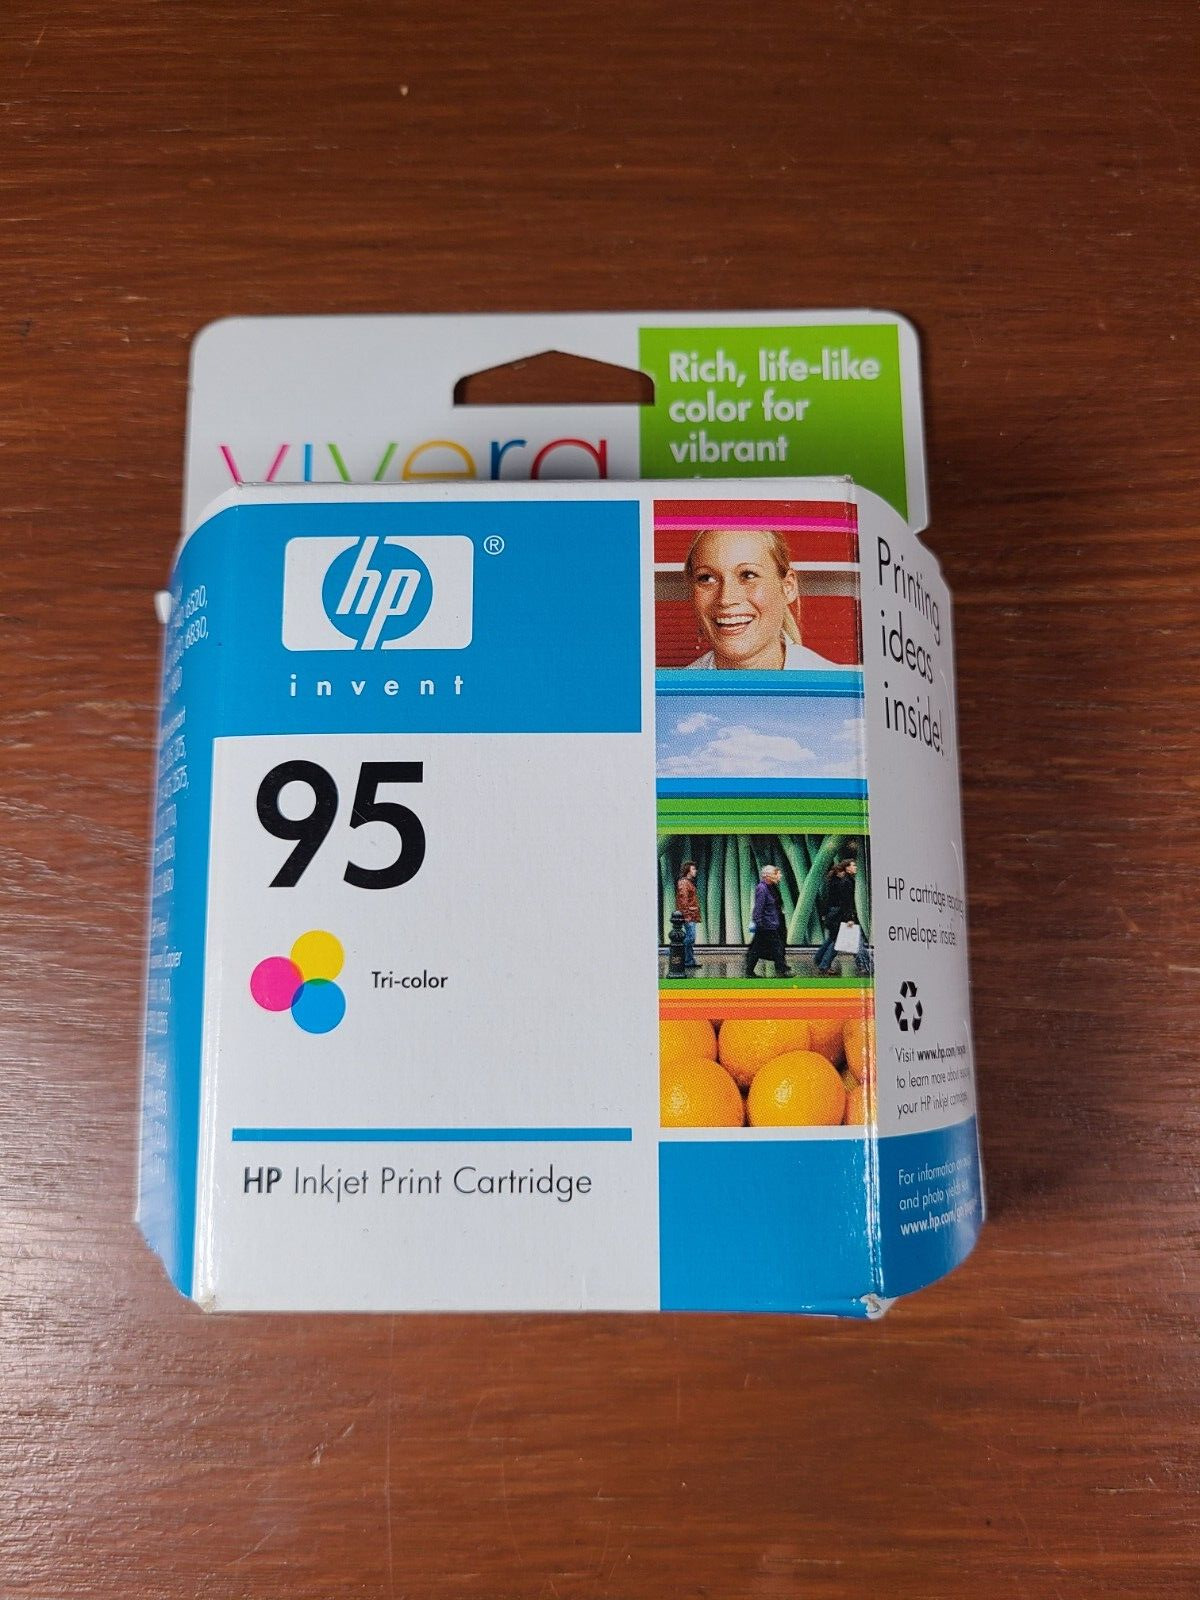 Vivera Hp 95 Tri-Color Ink Cartridge *Expired FEB 2007* NEW SEALED BOX